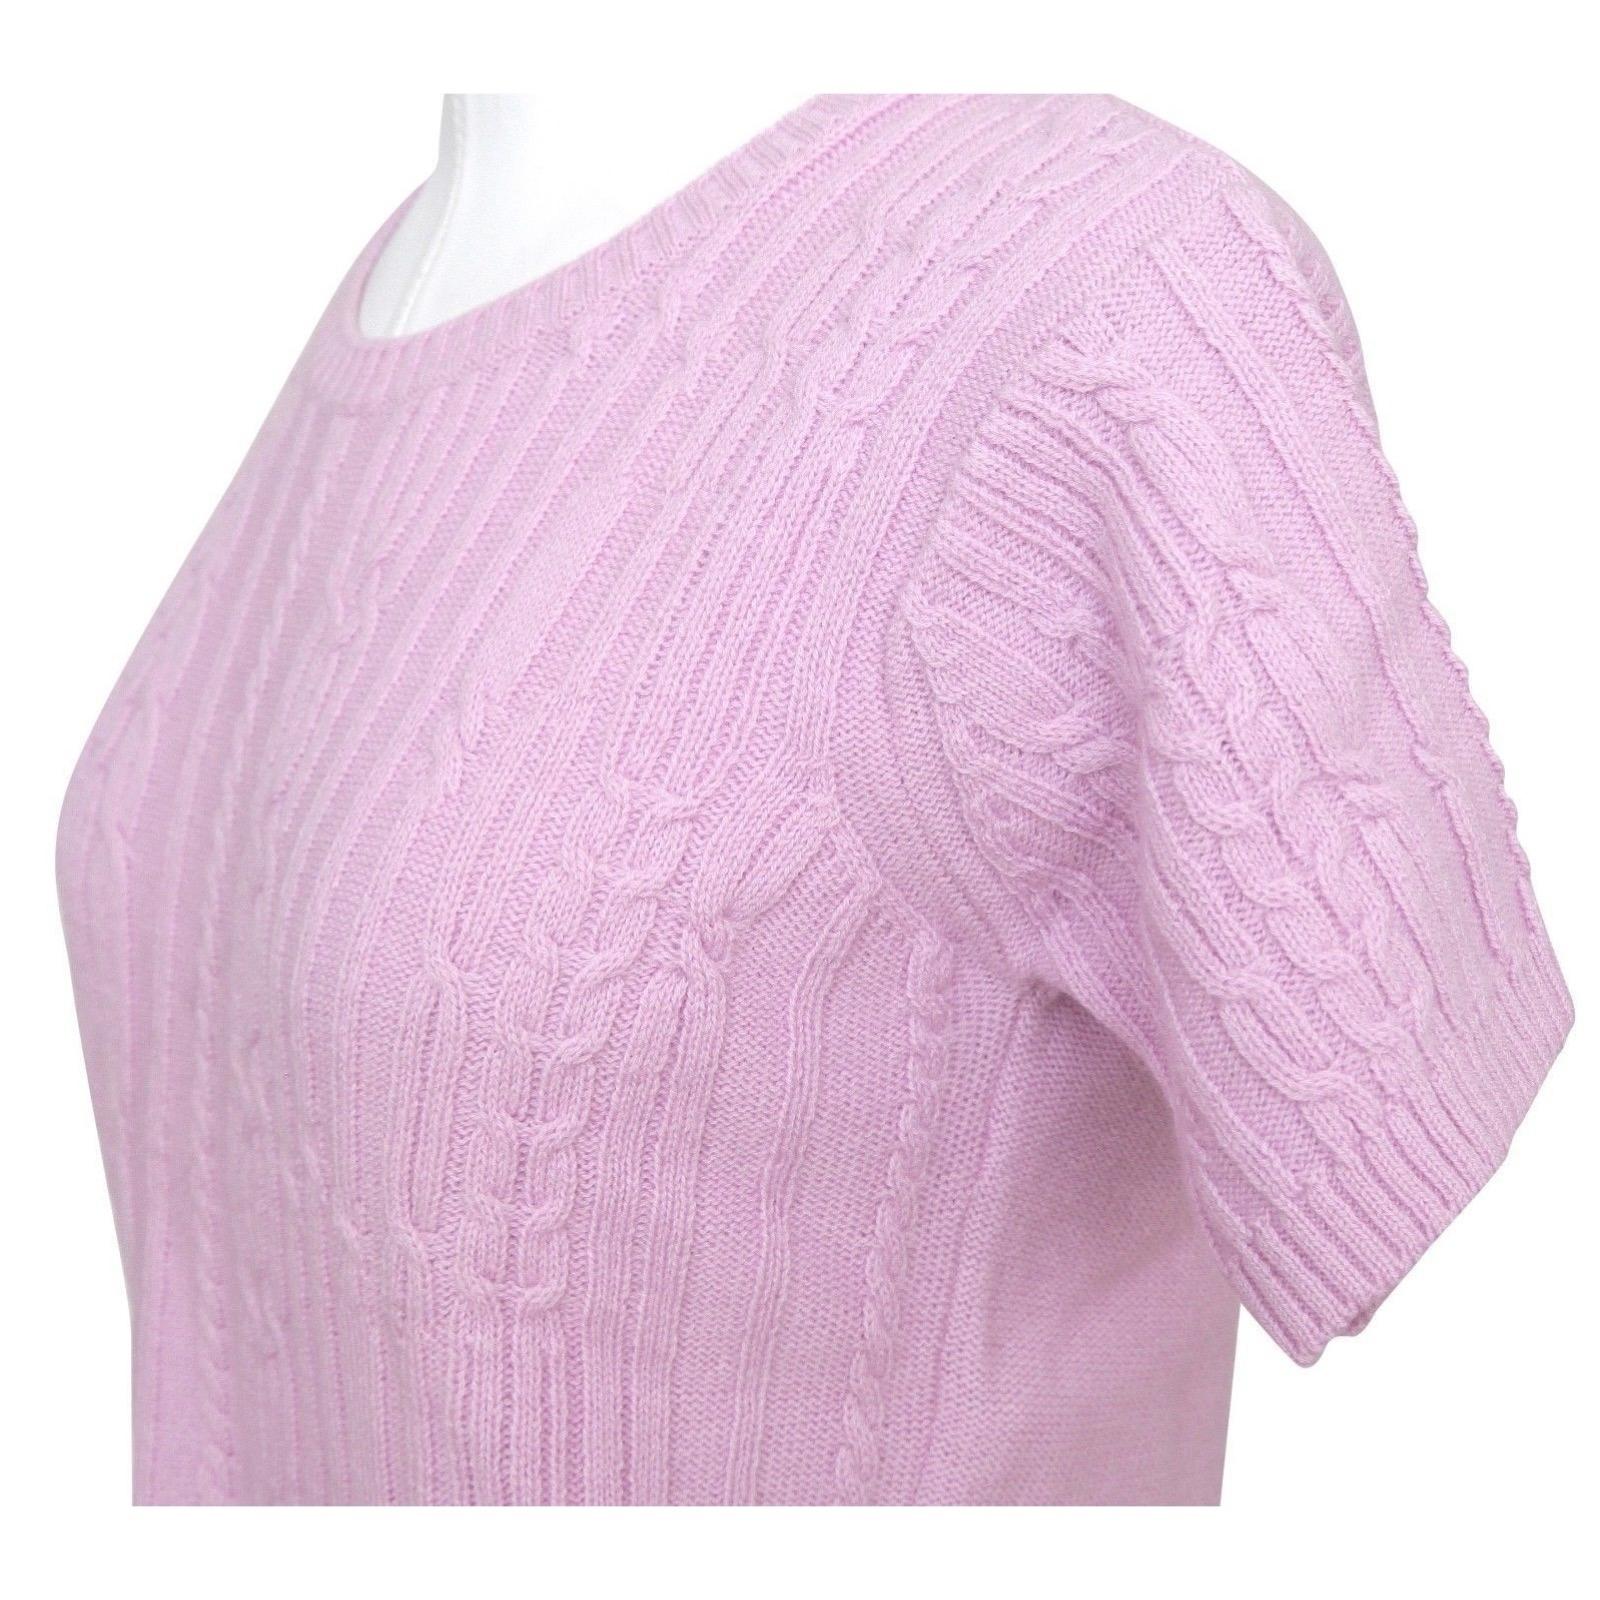 CHLOE Sweater Knit Short Sleeve Top Pink Crew Neck Wool Sz S For Sale 2